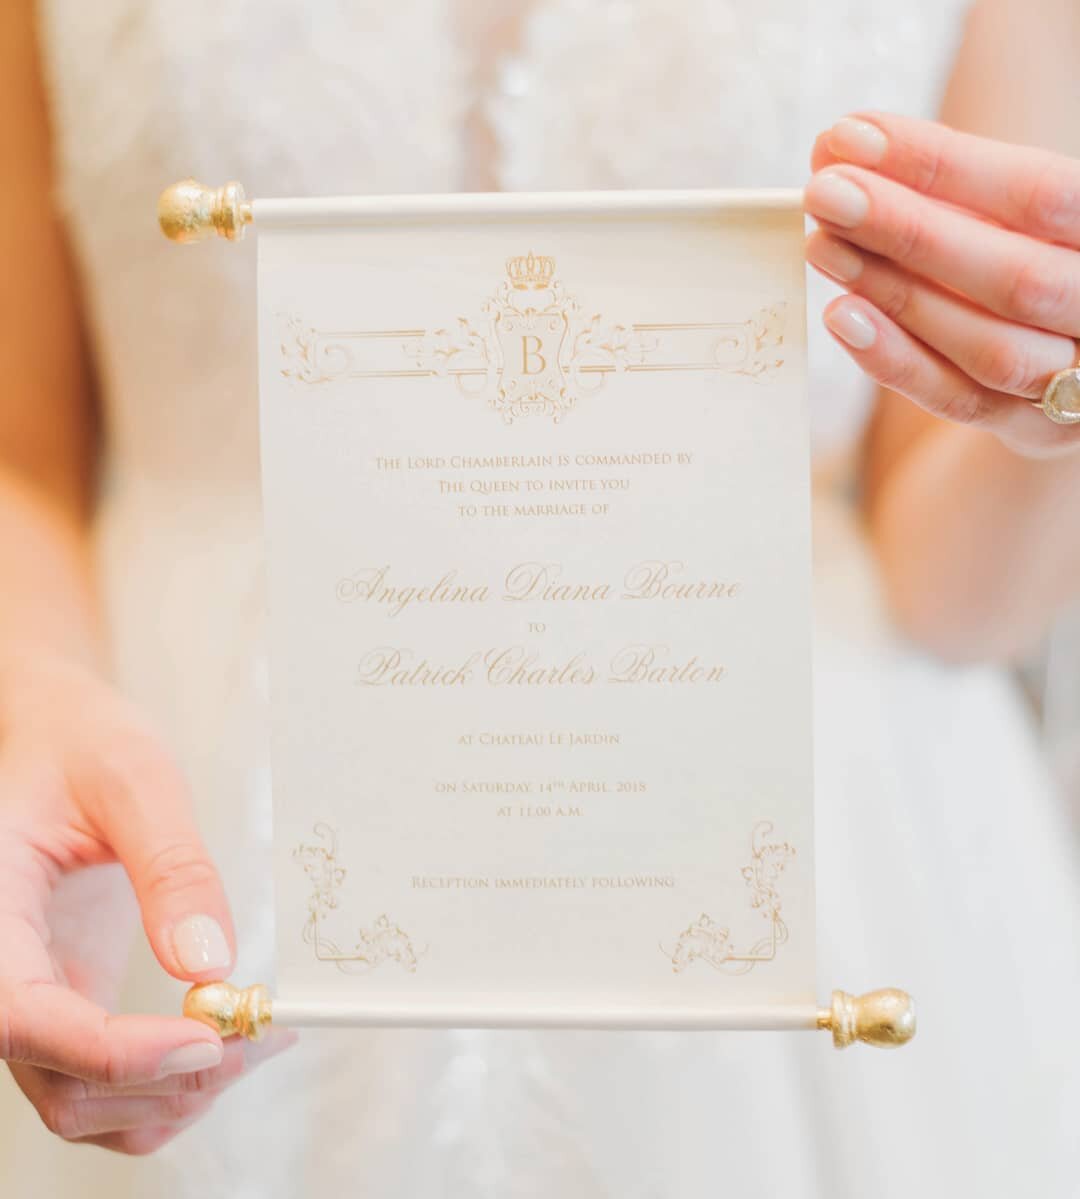 The #RoyalWedding is almost here! We created this beautiful scroll invitation inspired by the #royal wedding for a special styled shoot. More to come....
.
Co-Creative Director and Planner:&nbsp;@kyreeskreations
Co-Creative Director and Make-up Artis